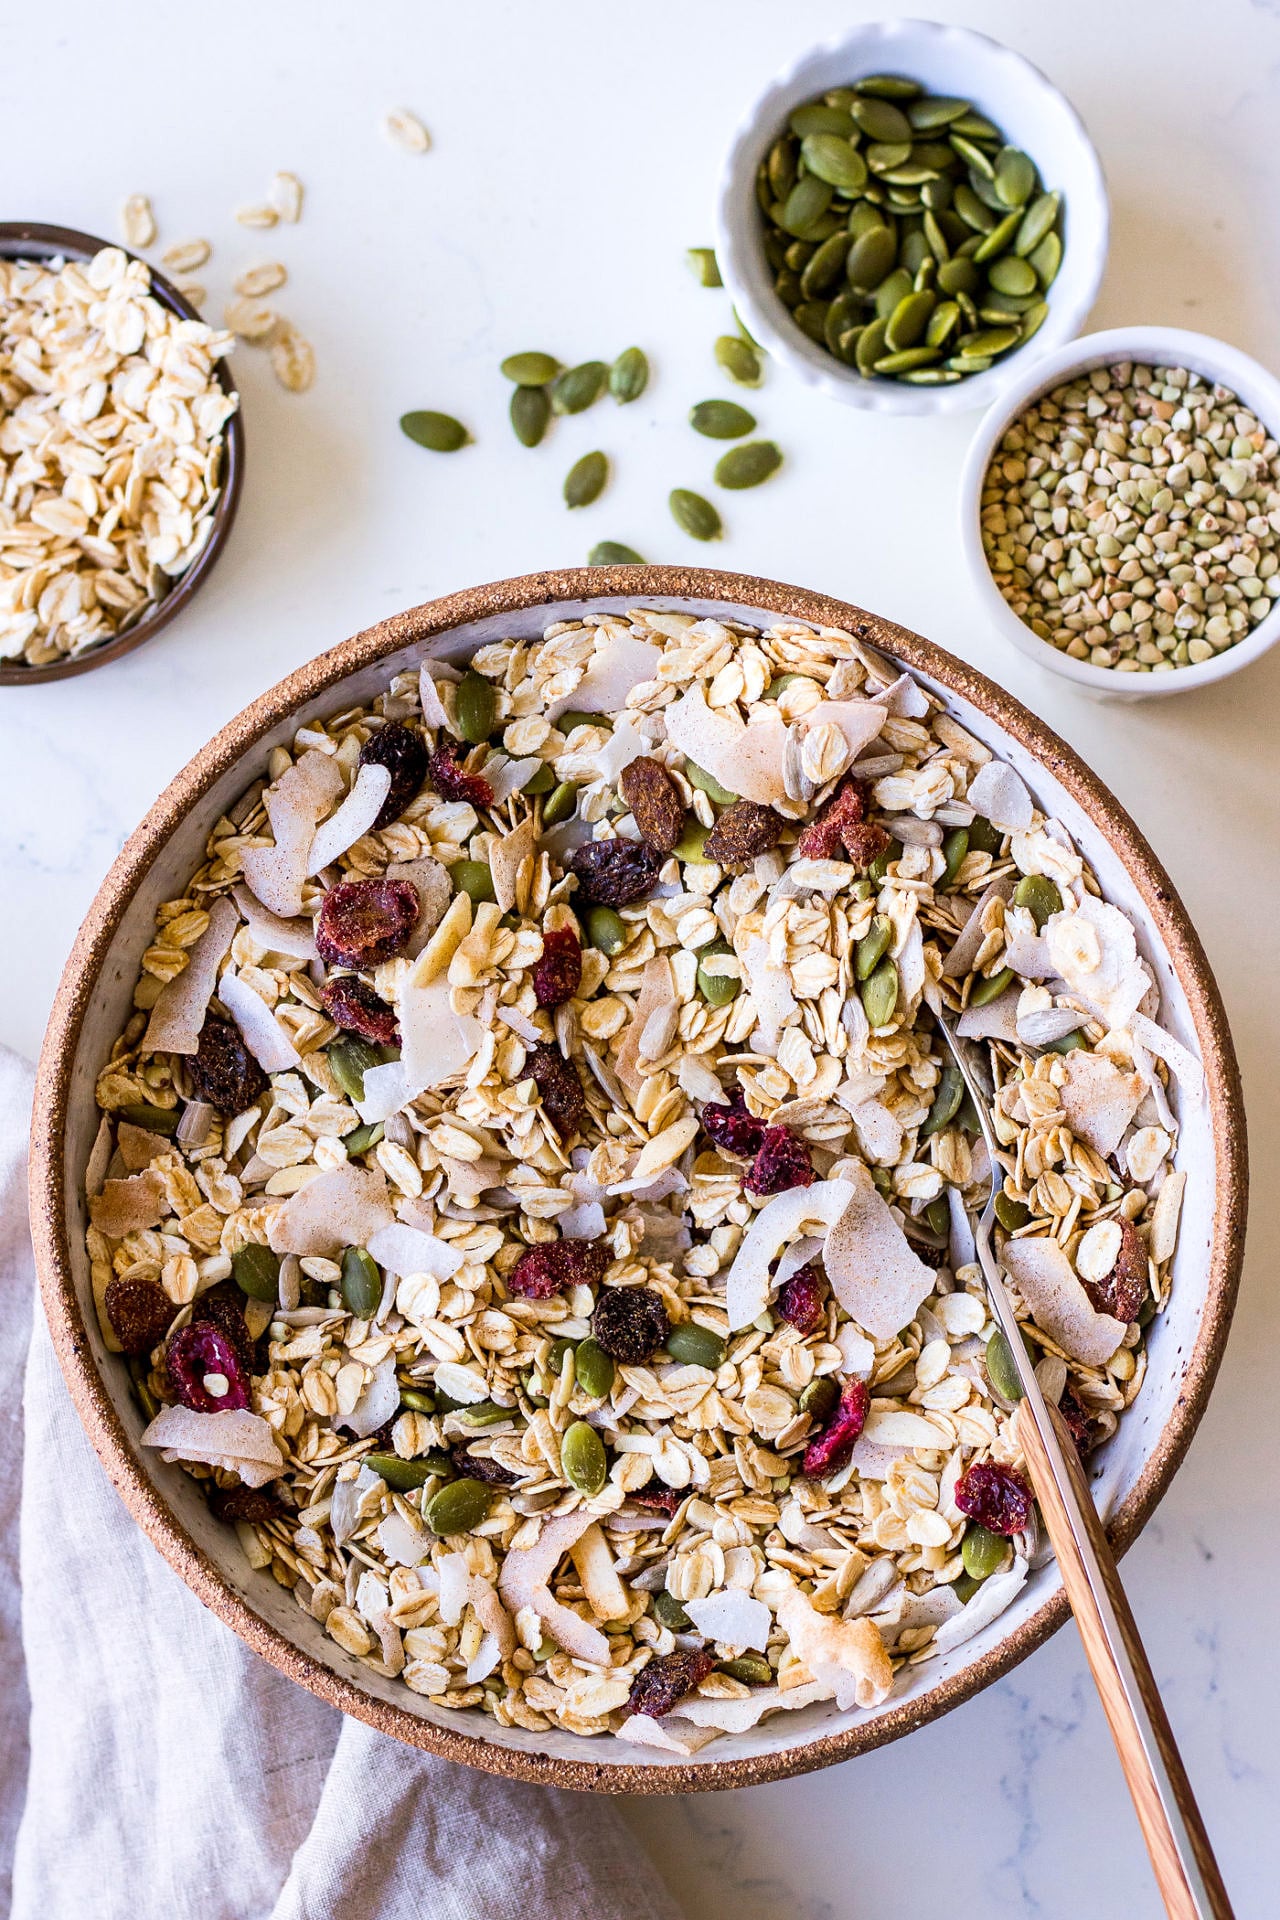 Large ceramic bowl filled with a healthy oat, coconut, pumpkin seed and dried fruit muesli with a wooden spoon sticking out